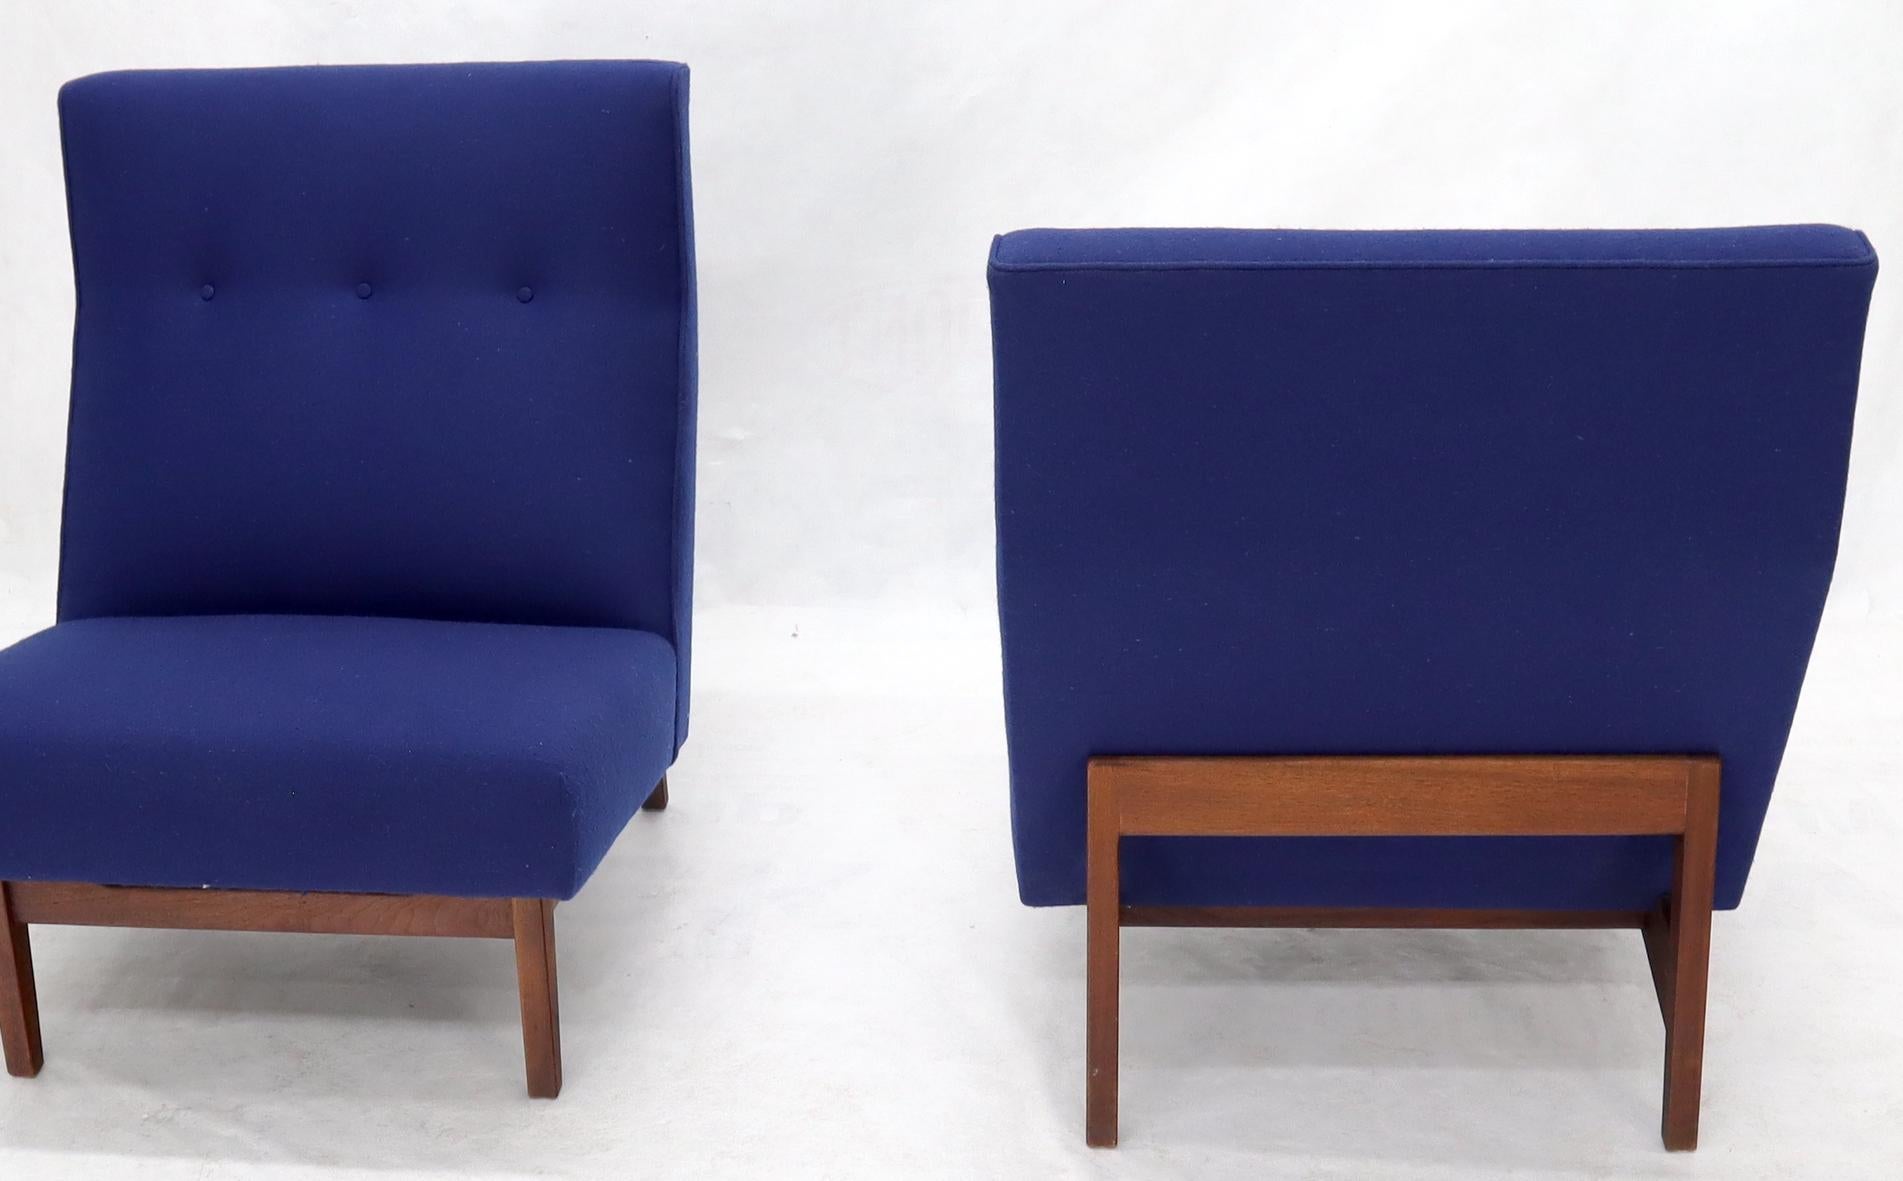 Pair of Classic Jens Risom lounge chairs in navy blue wool upholstery. Gorgeous oiled walnut frames.